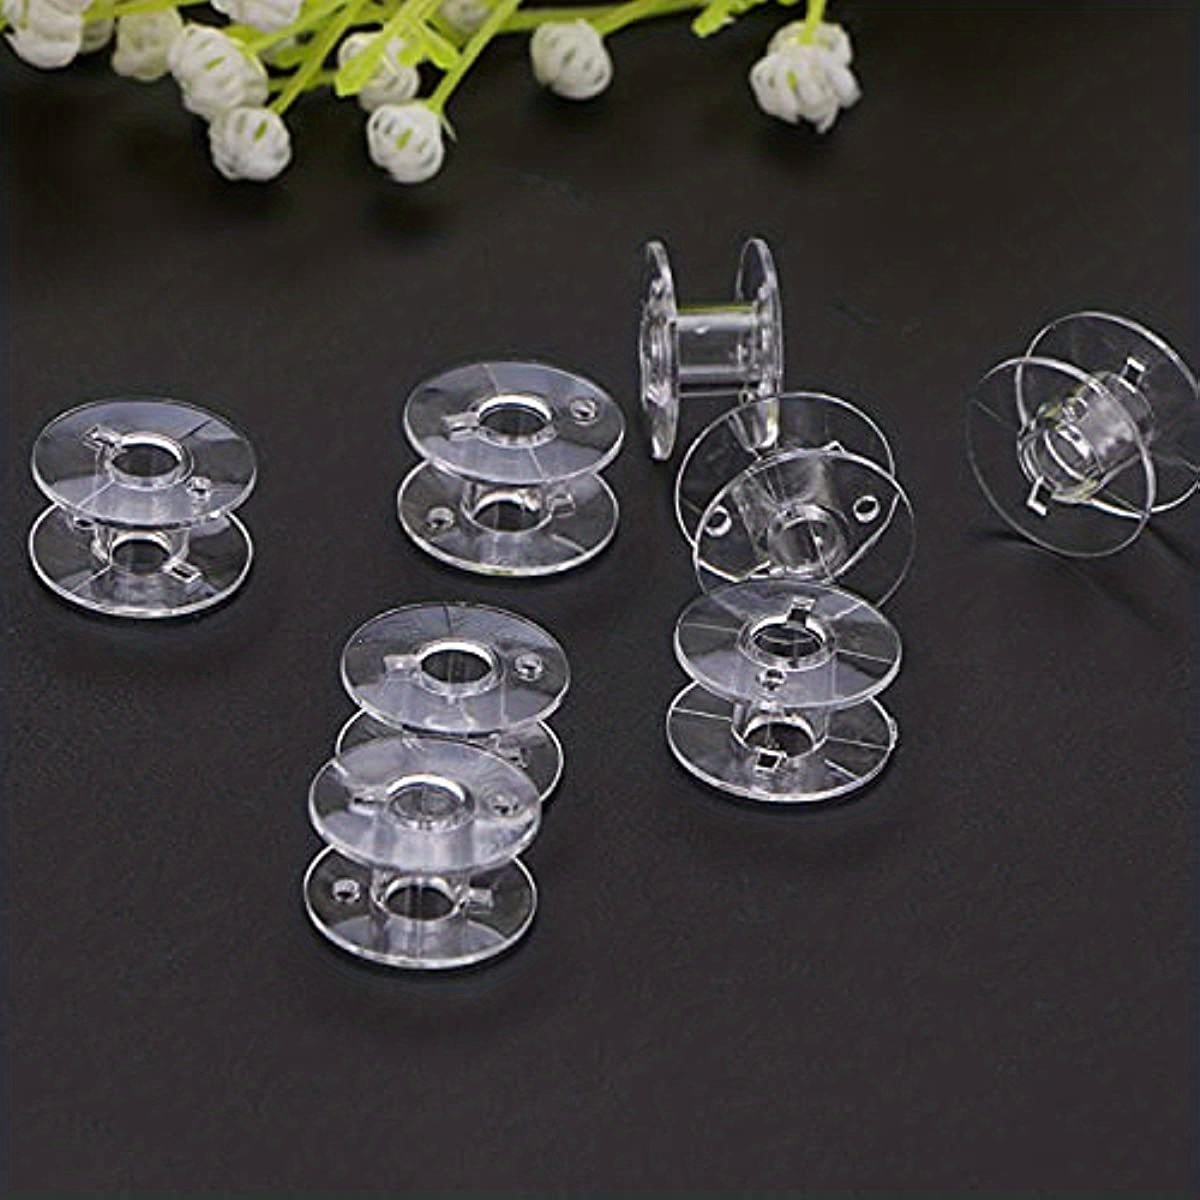 10pcs Style Sa156 Sewing Machine Bobbins For Brother, 90 Days Buyer  Protection